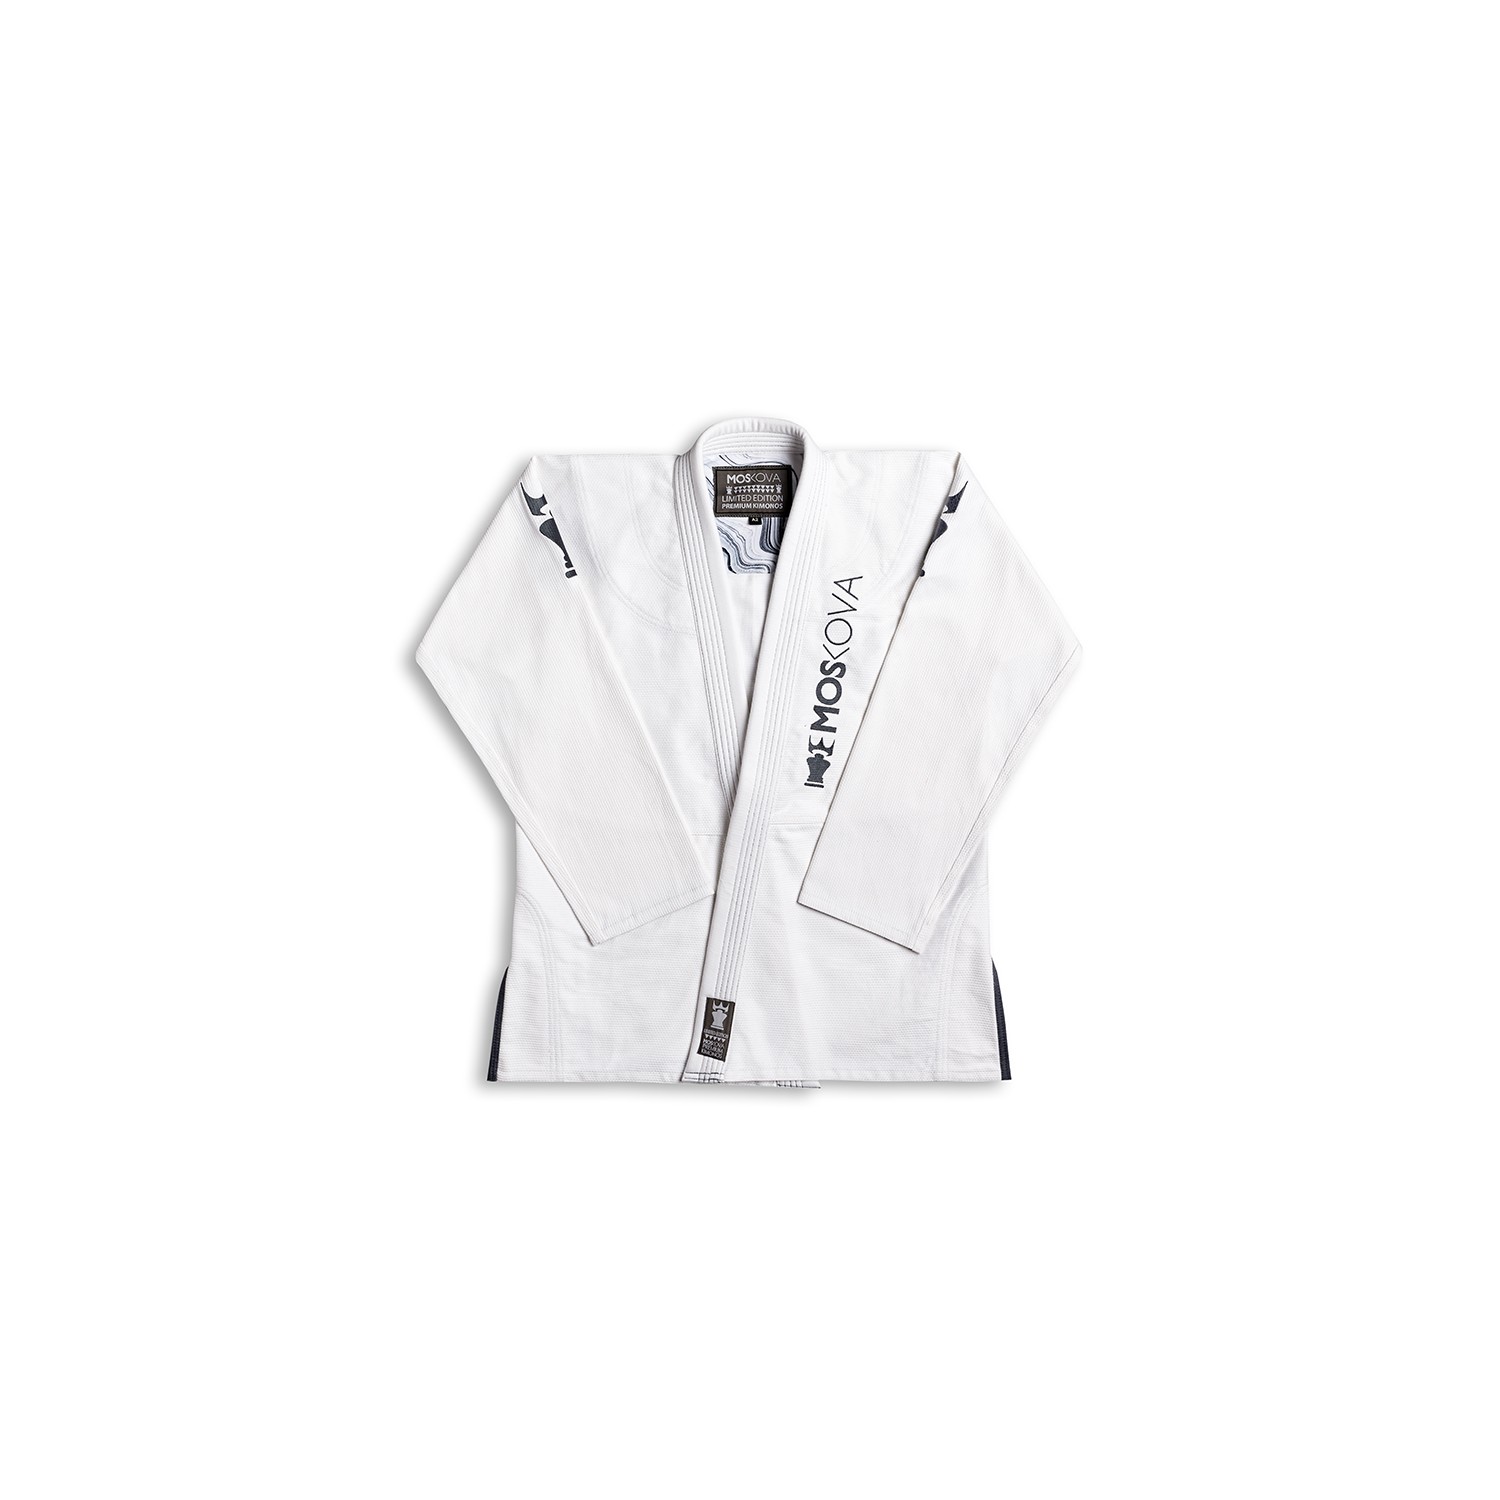 BJJ Gi Limited Edition Marble White